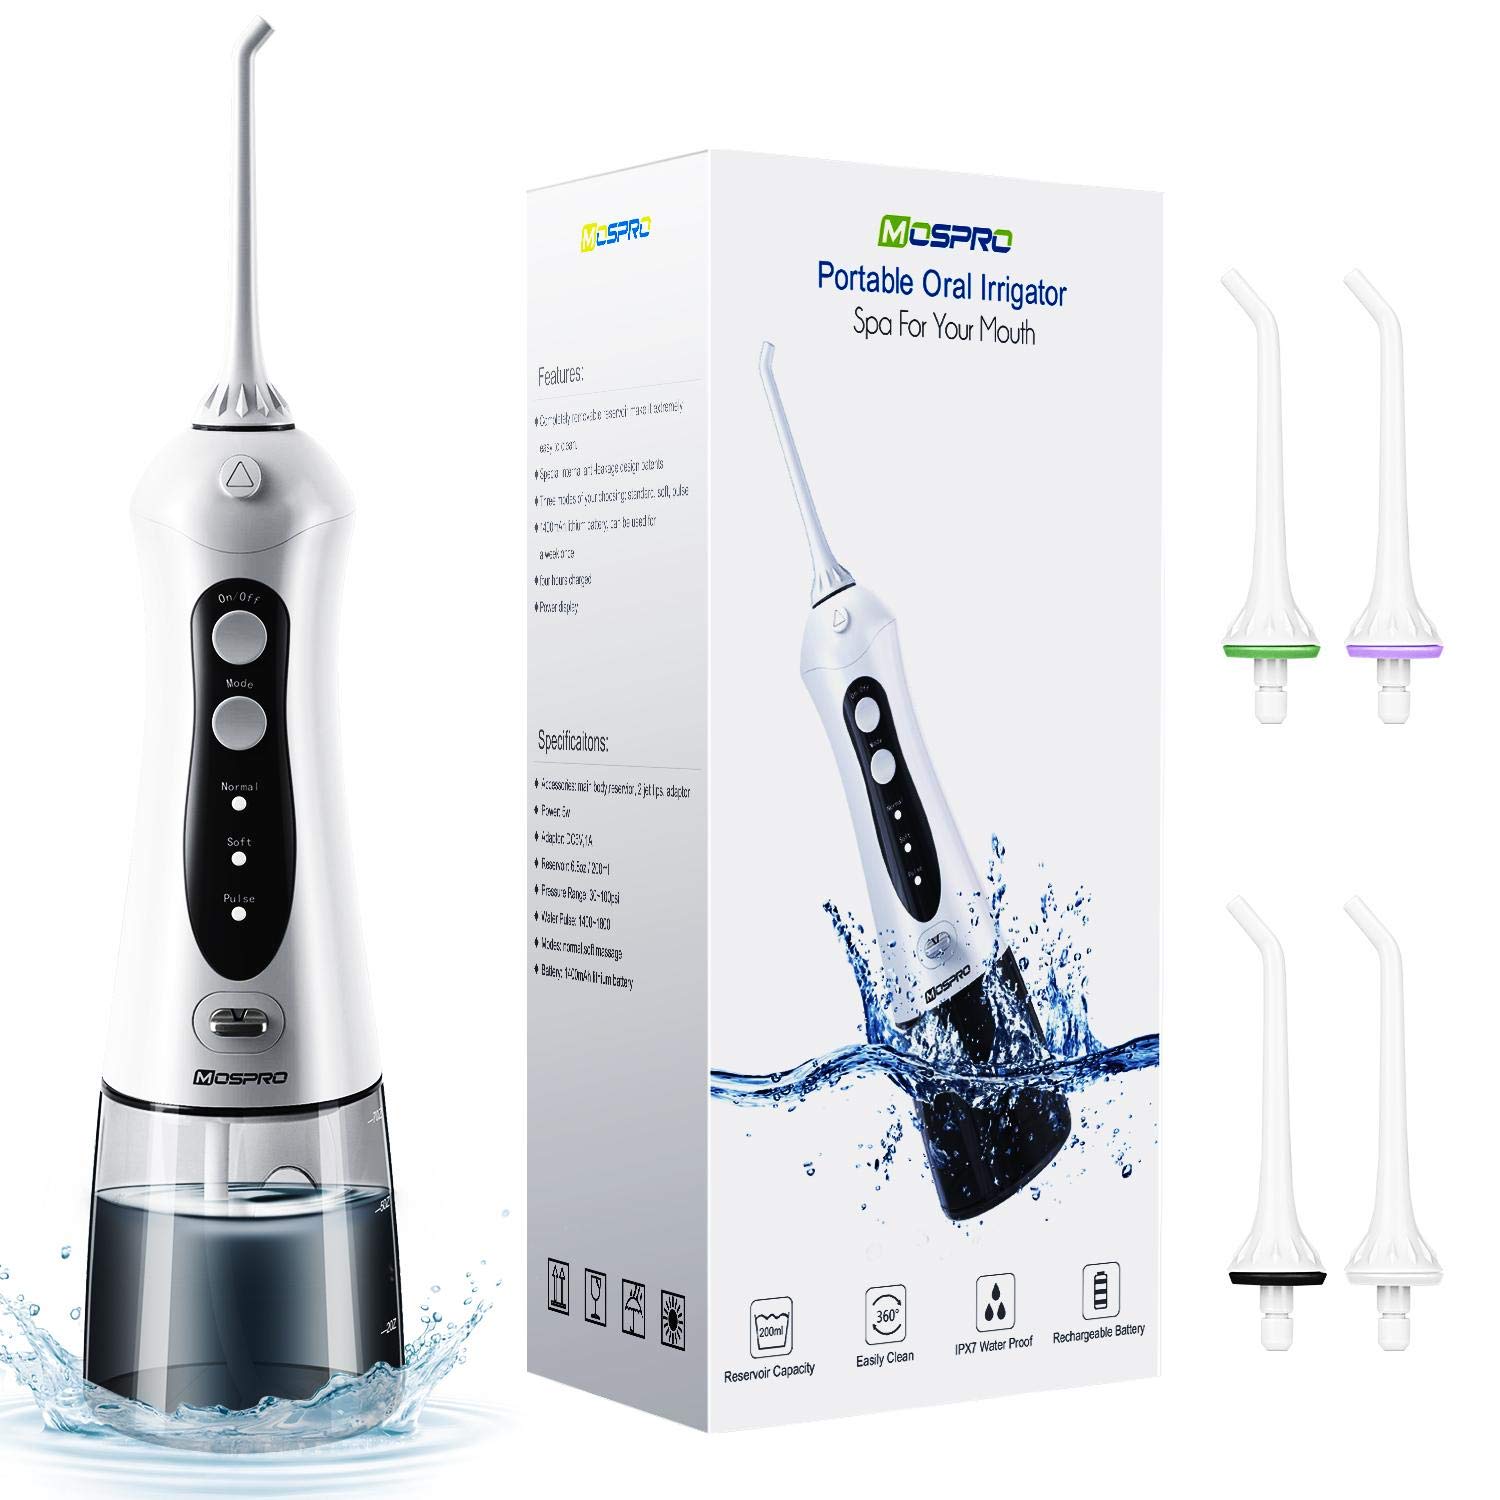 MOSPRO IPX7 Portable Water Flosser & Oral Irrigator